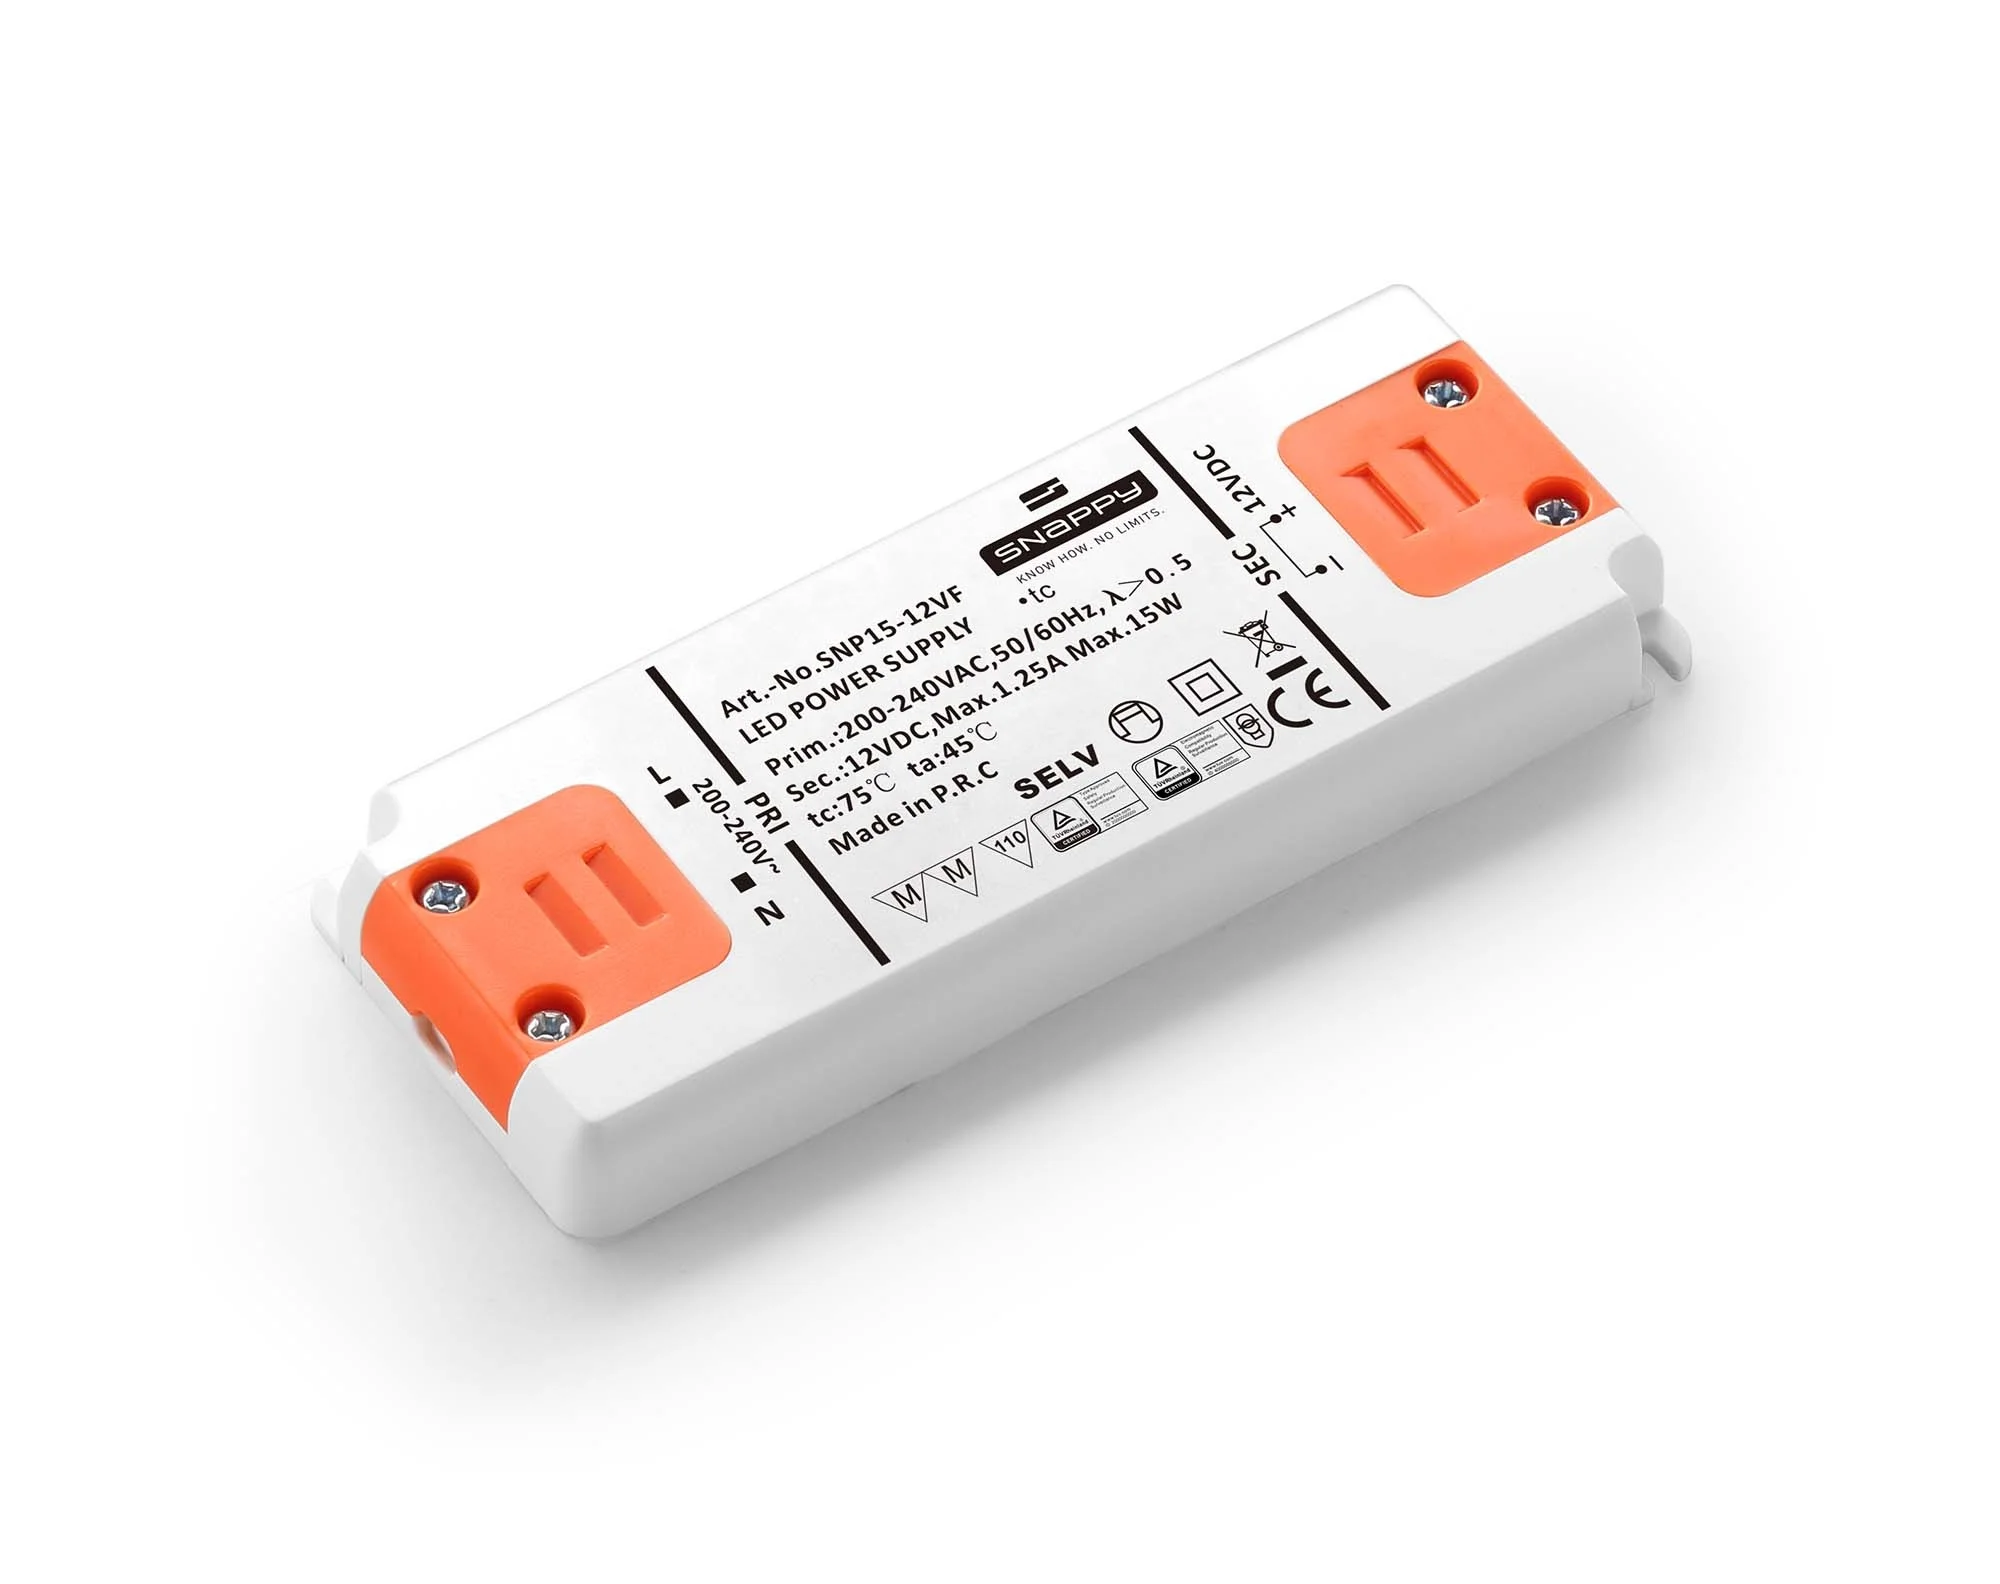 SNP15-350IF Input voltage 200-240VAC 15W 350mA 500mA 700mA IP20 thickness 13mm constant current LED DRIVER for strip lights